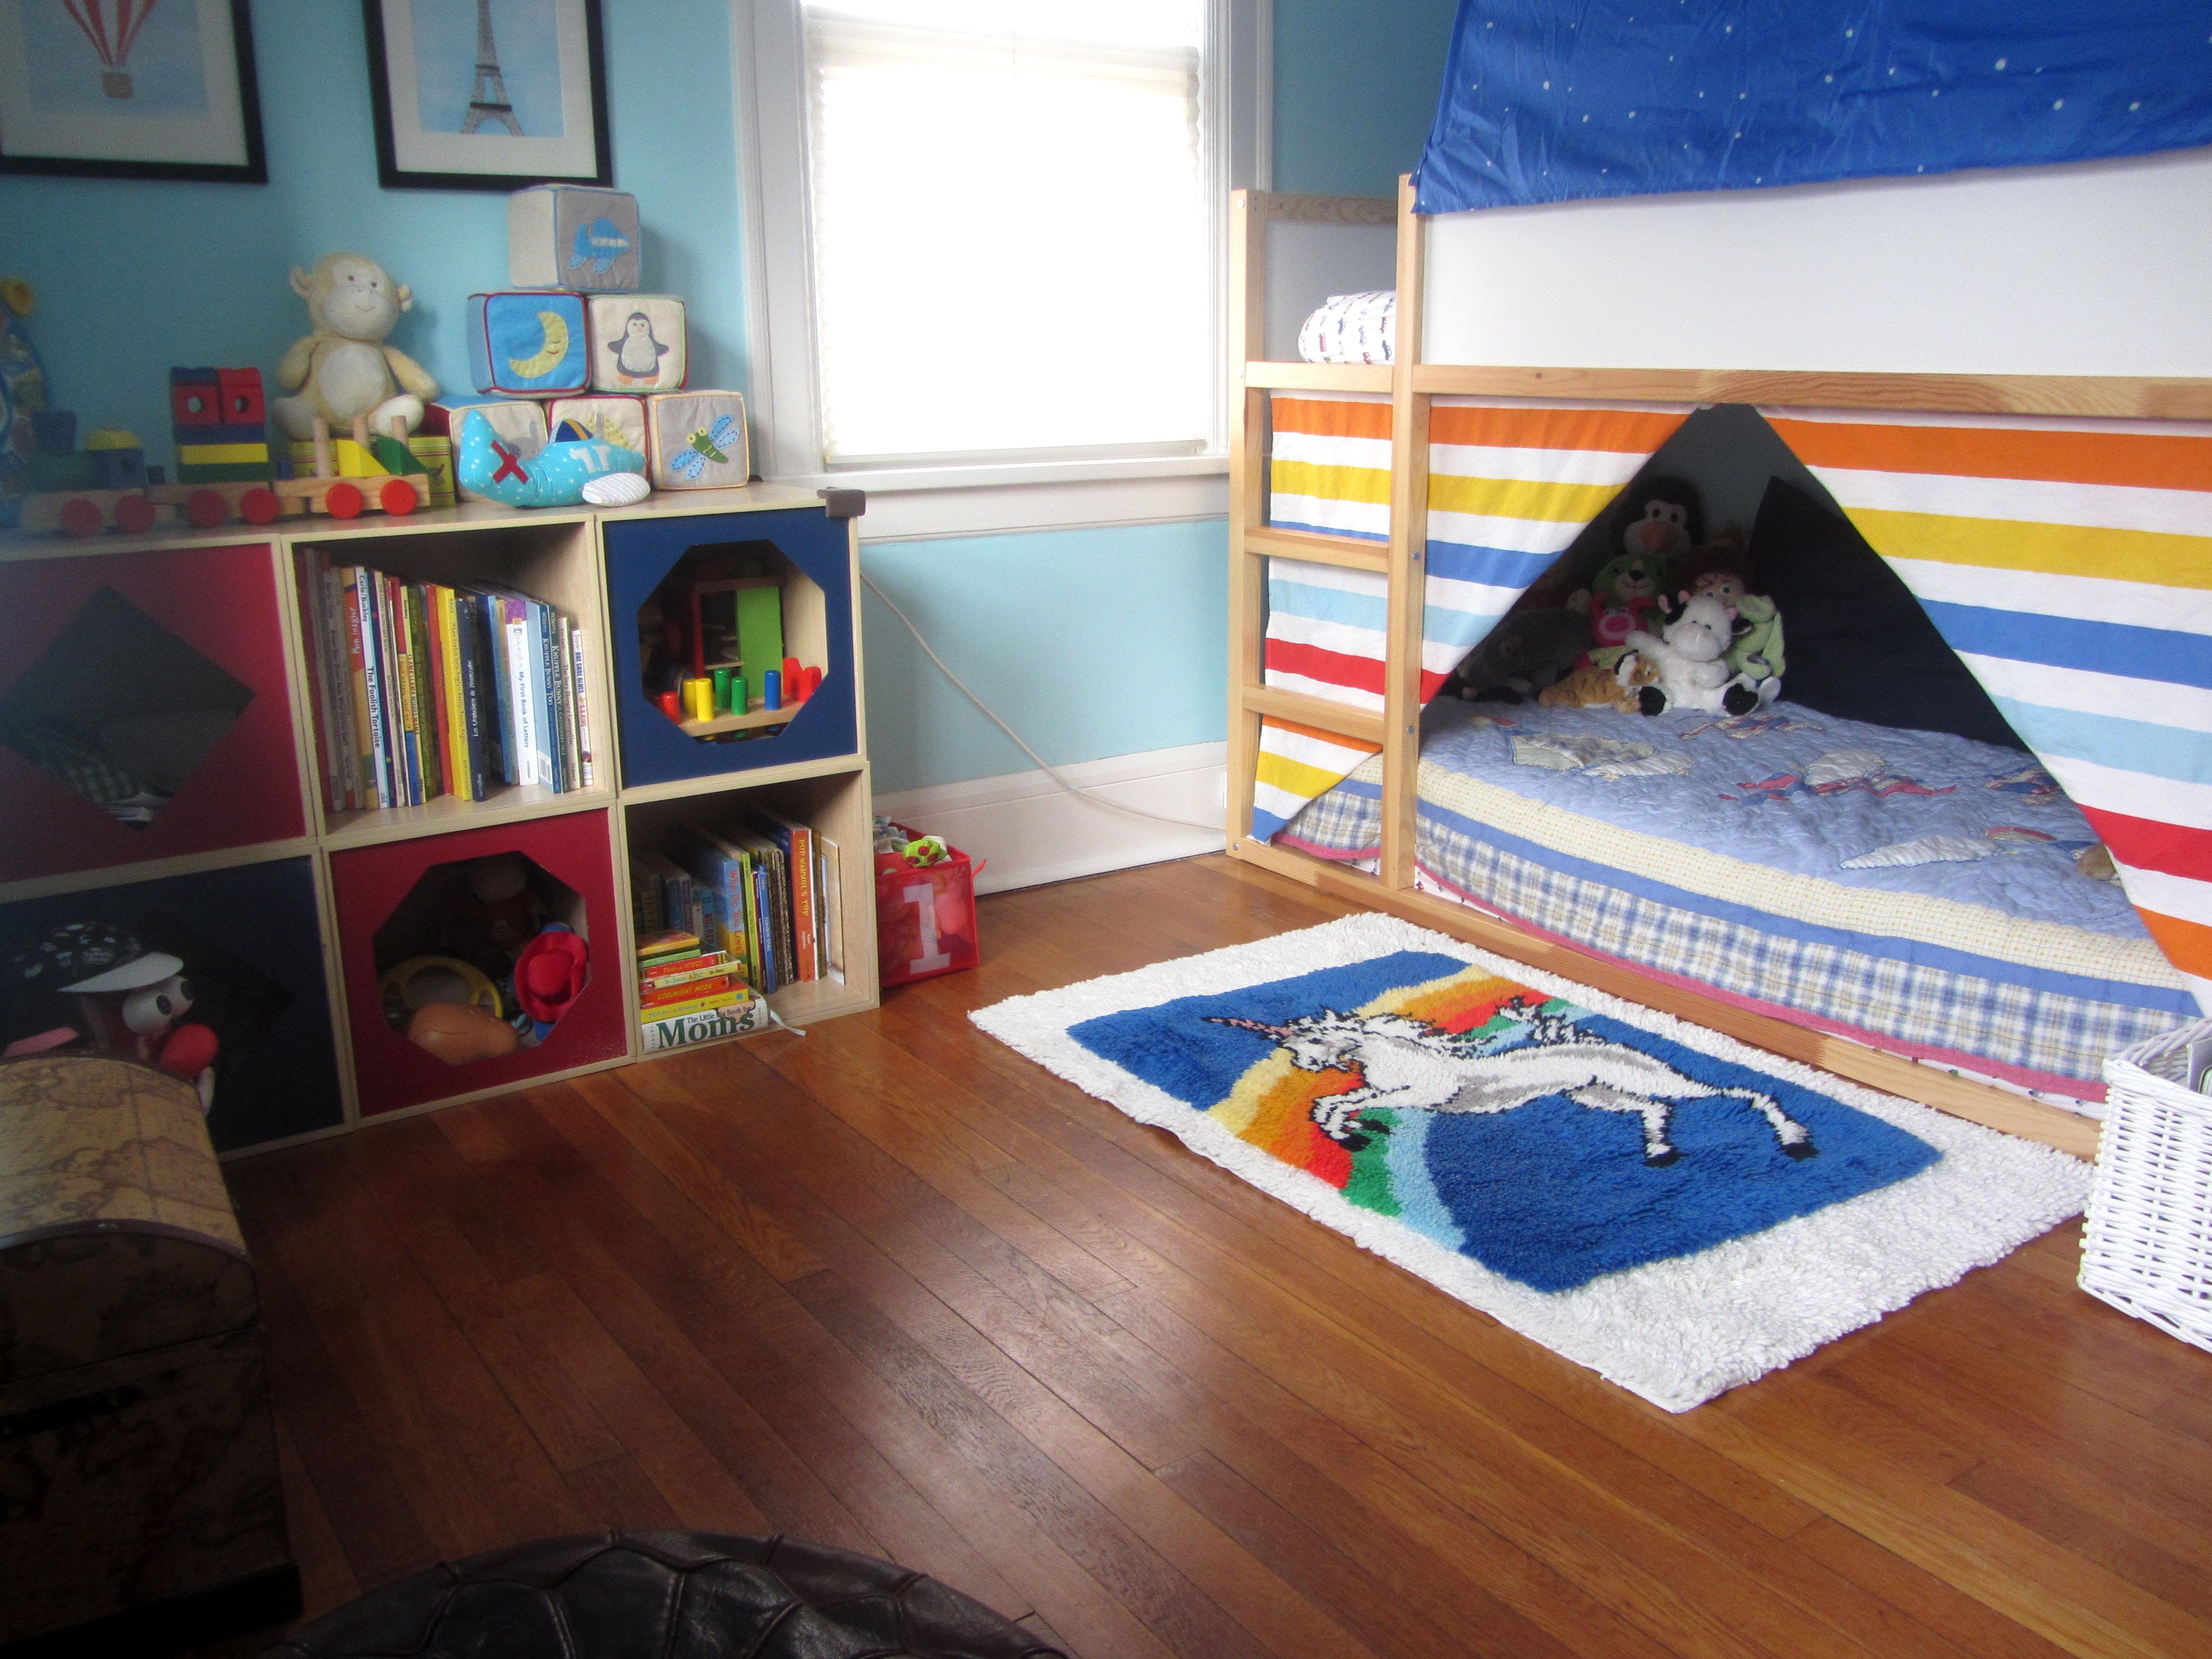 Every month i like to go in and give my kids rooms a good cleaning and have them m. The Kids Room Was Clean This One Time Colorwheel